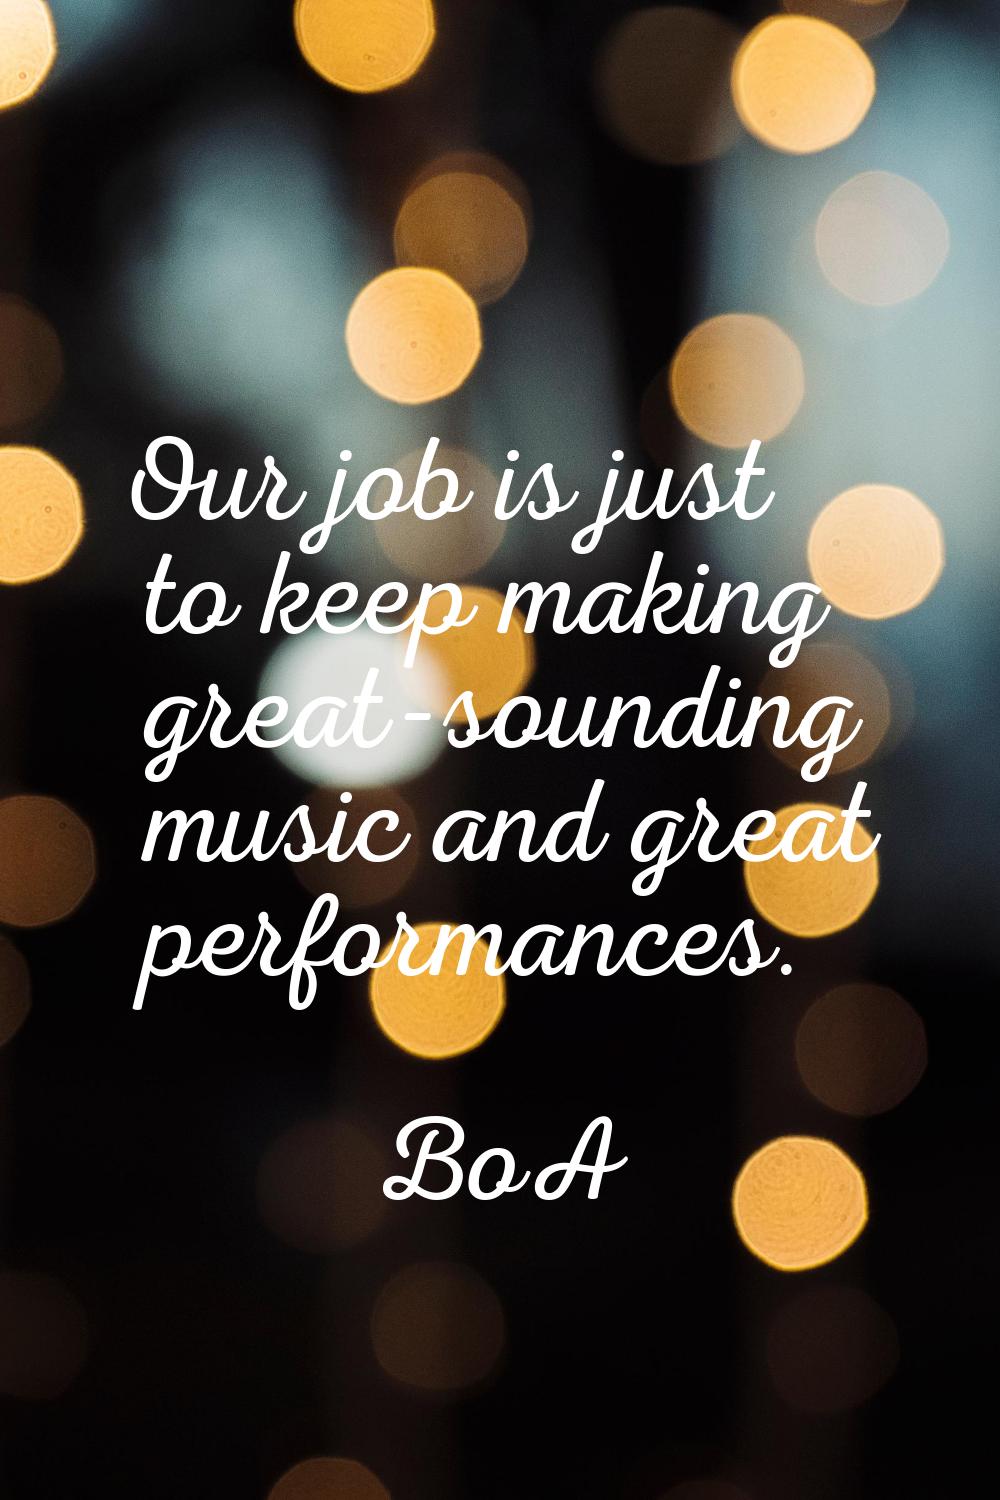 Our job is just to keep making great-sounding music and great performances.